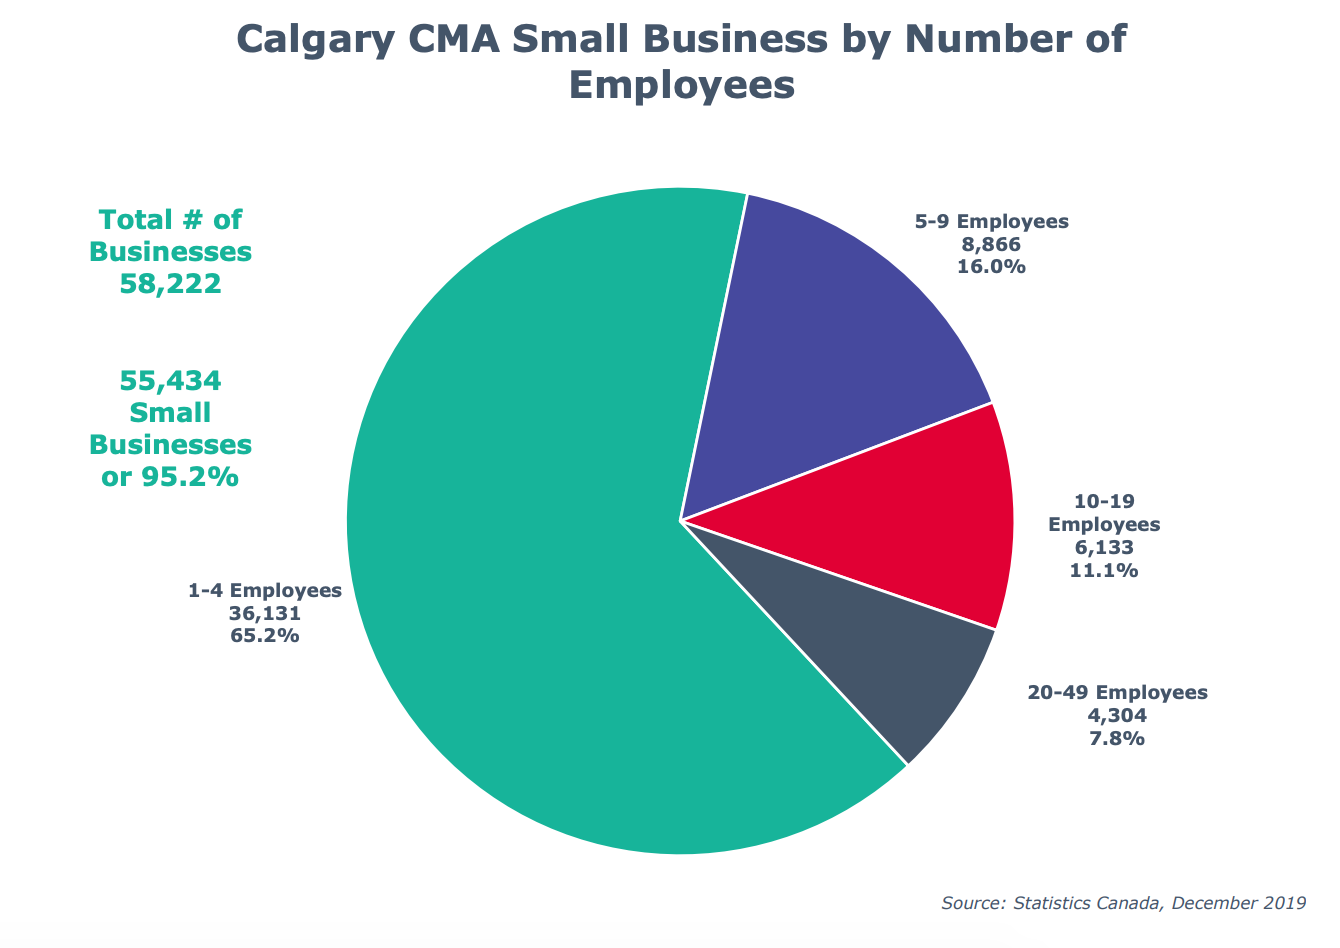 Chart showing breakdown of Calgary small businesses by number of employees.